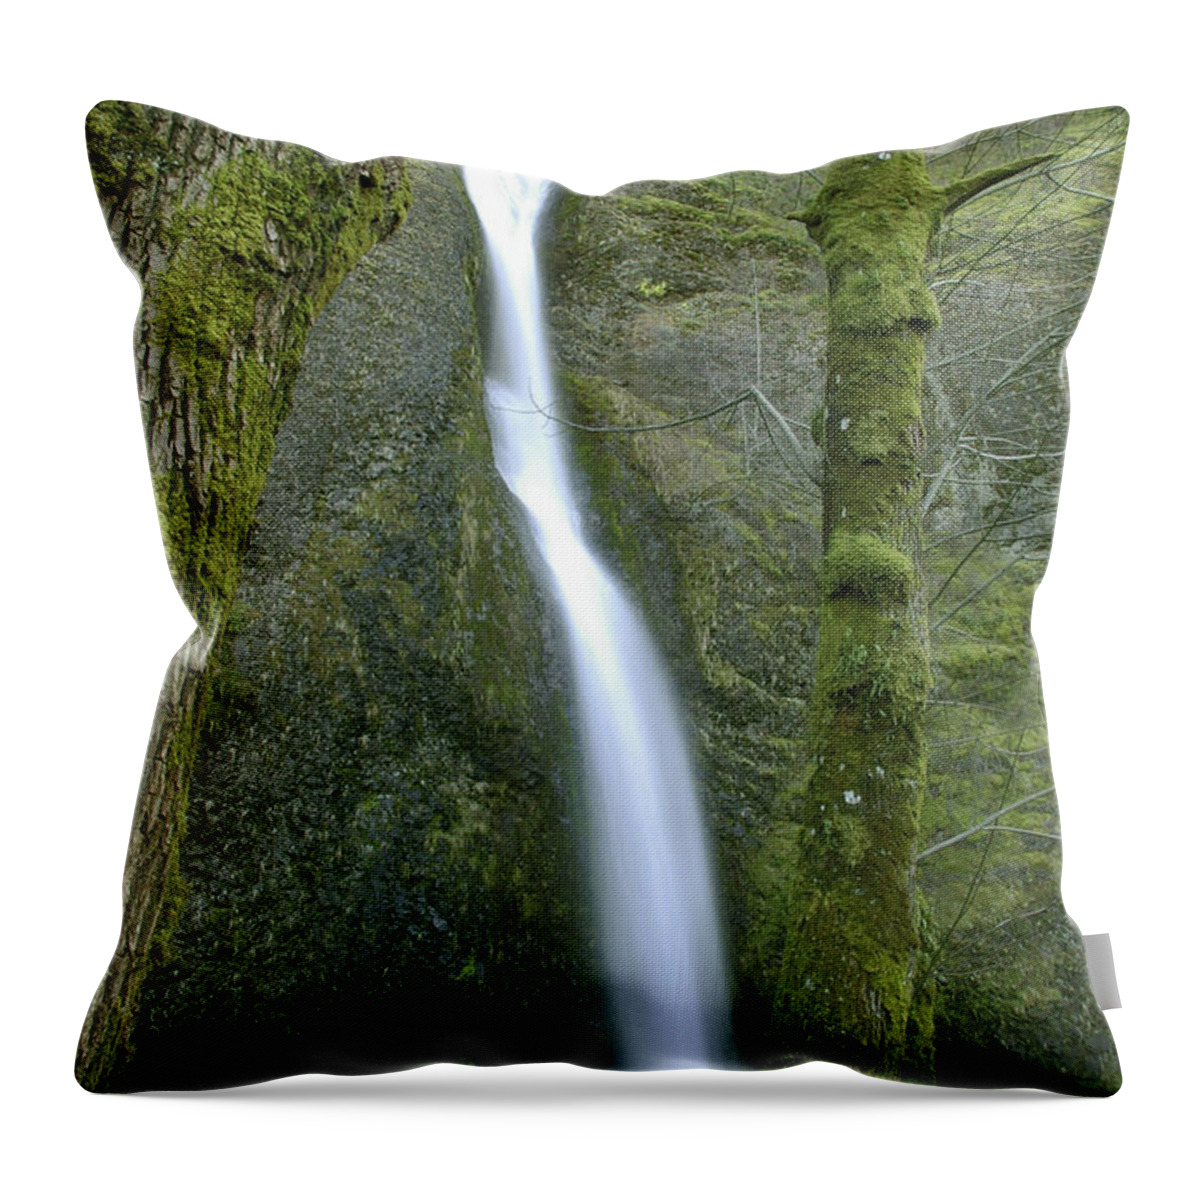 Waterfall Throw Pillow featuring the photograph Horsetail Falls by Rick Bures